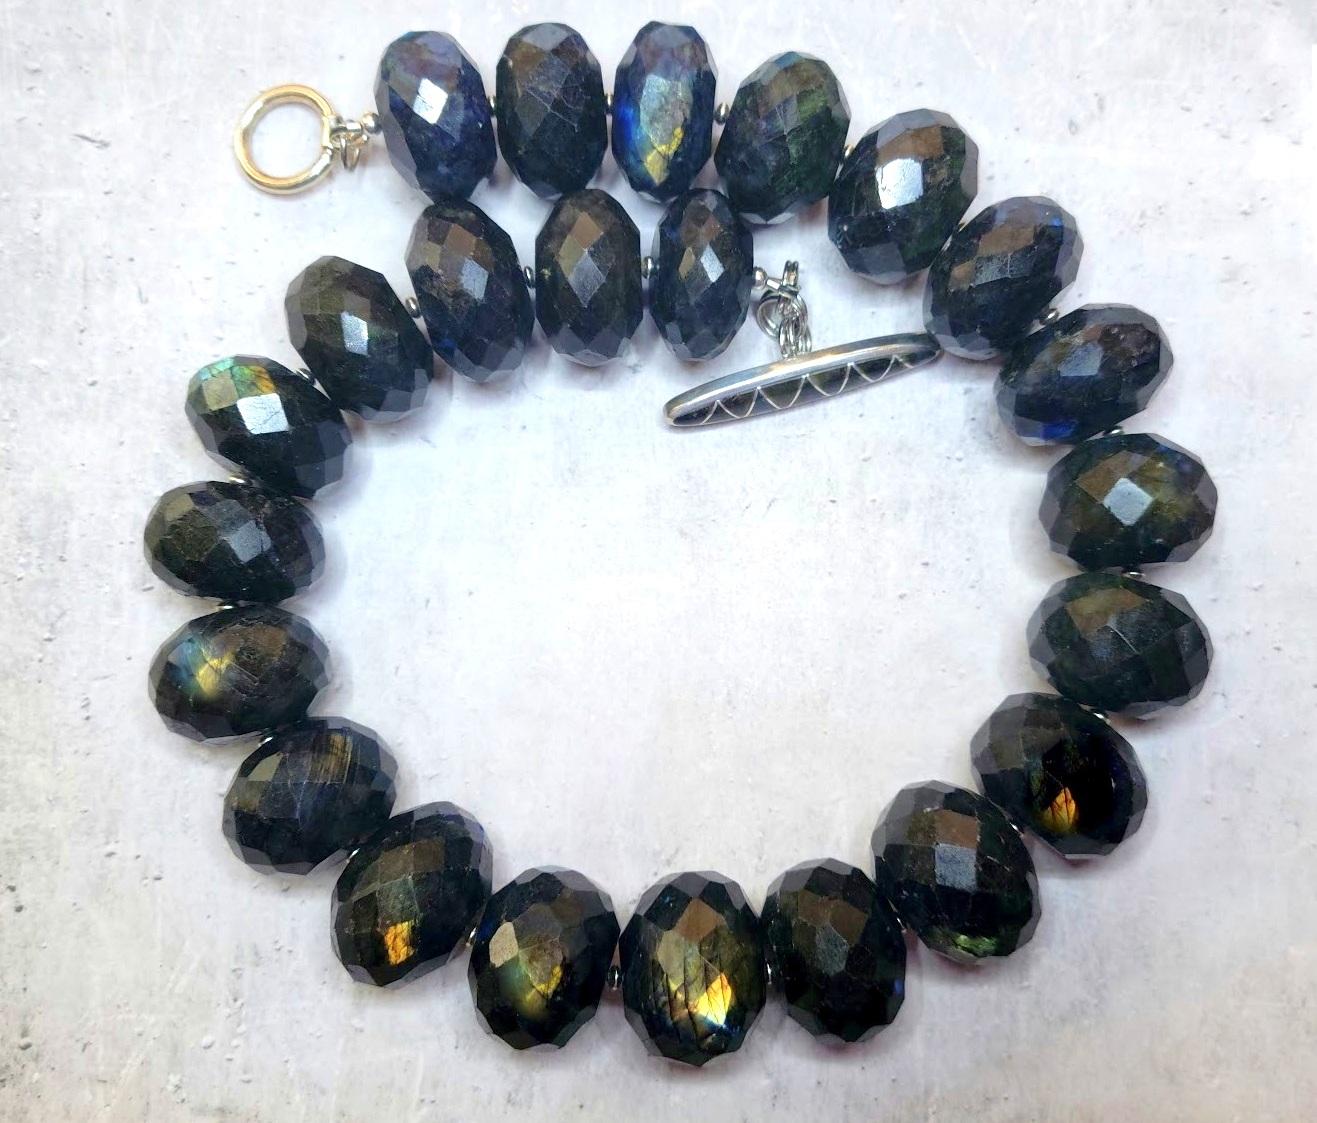 Huge Canadian Labradorite Rondelle Beaded Necklace.

Labradorite is a feldspar mineral.
It has a labradorescence, which is the meaning behind its name. The crystals are often found in thin and tabular shapes with colors ranging from purple to